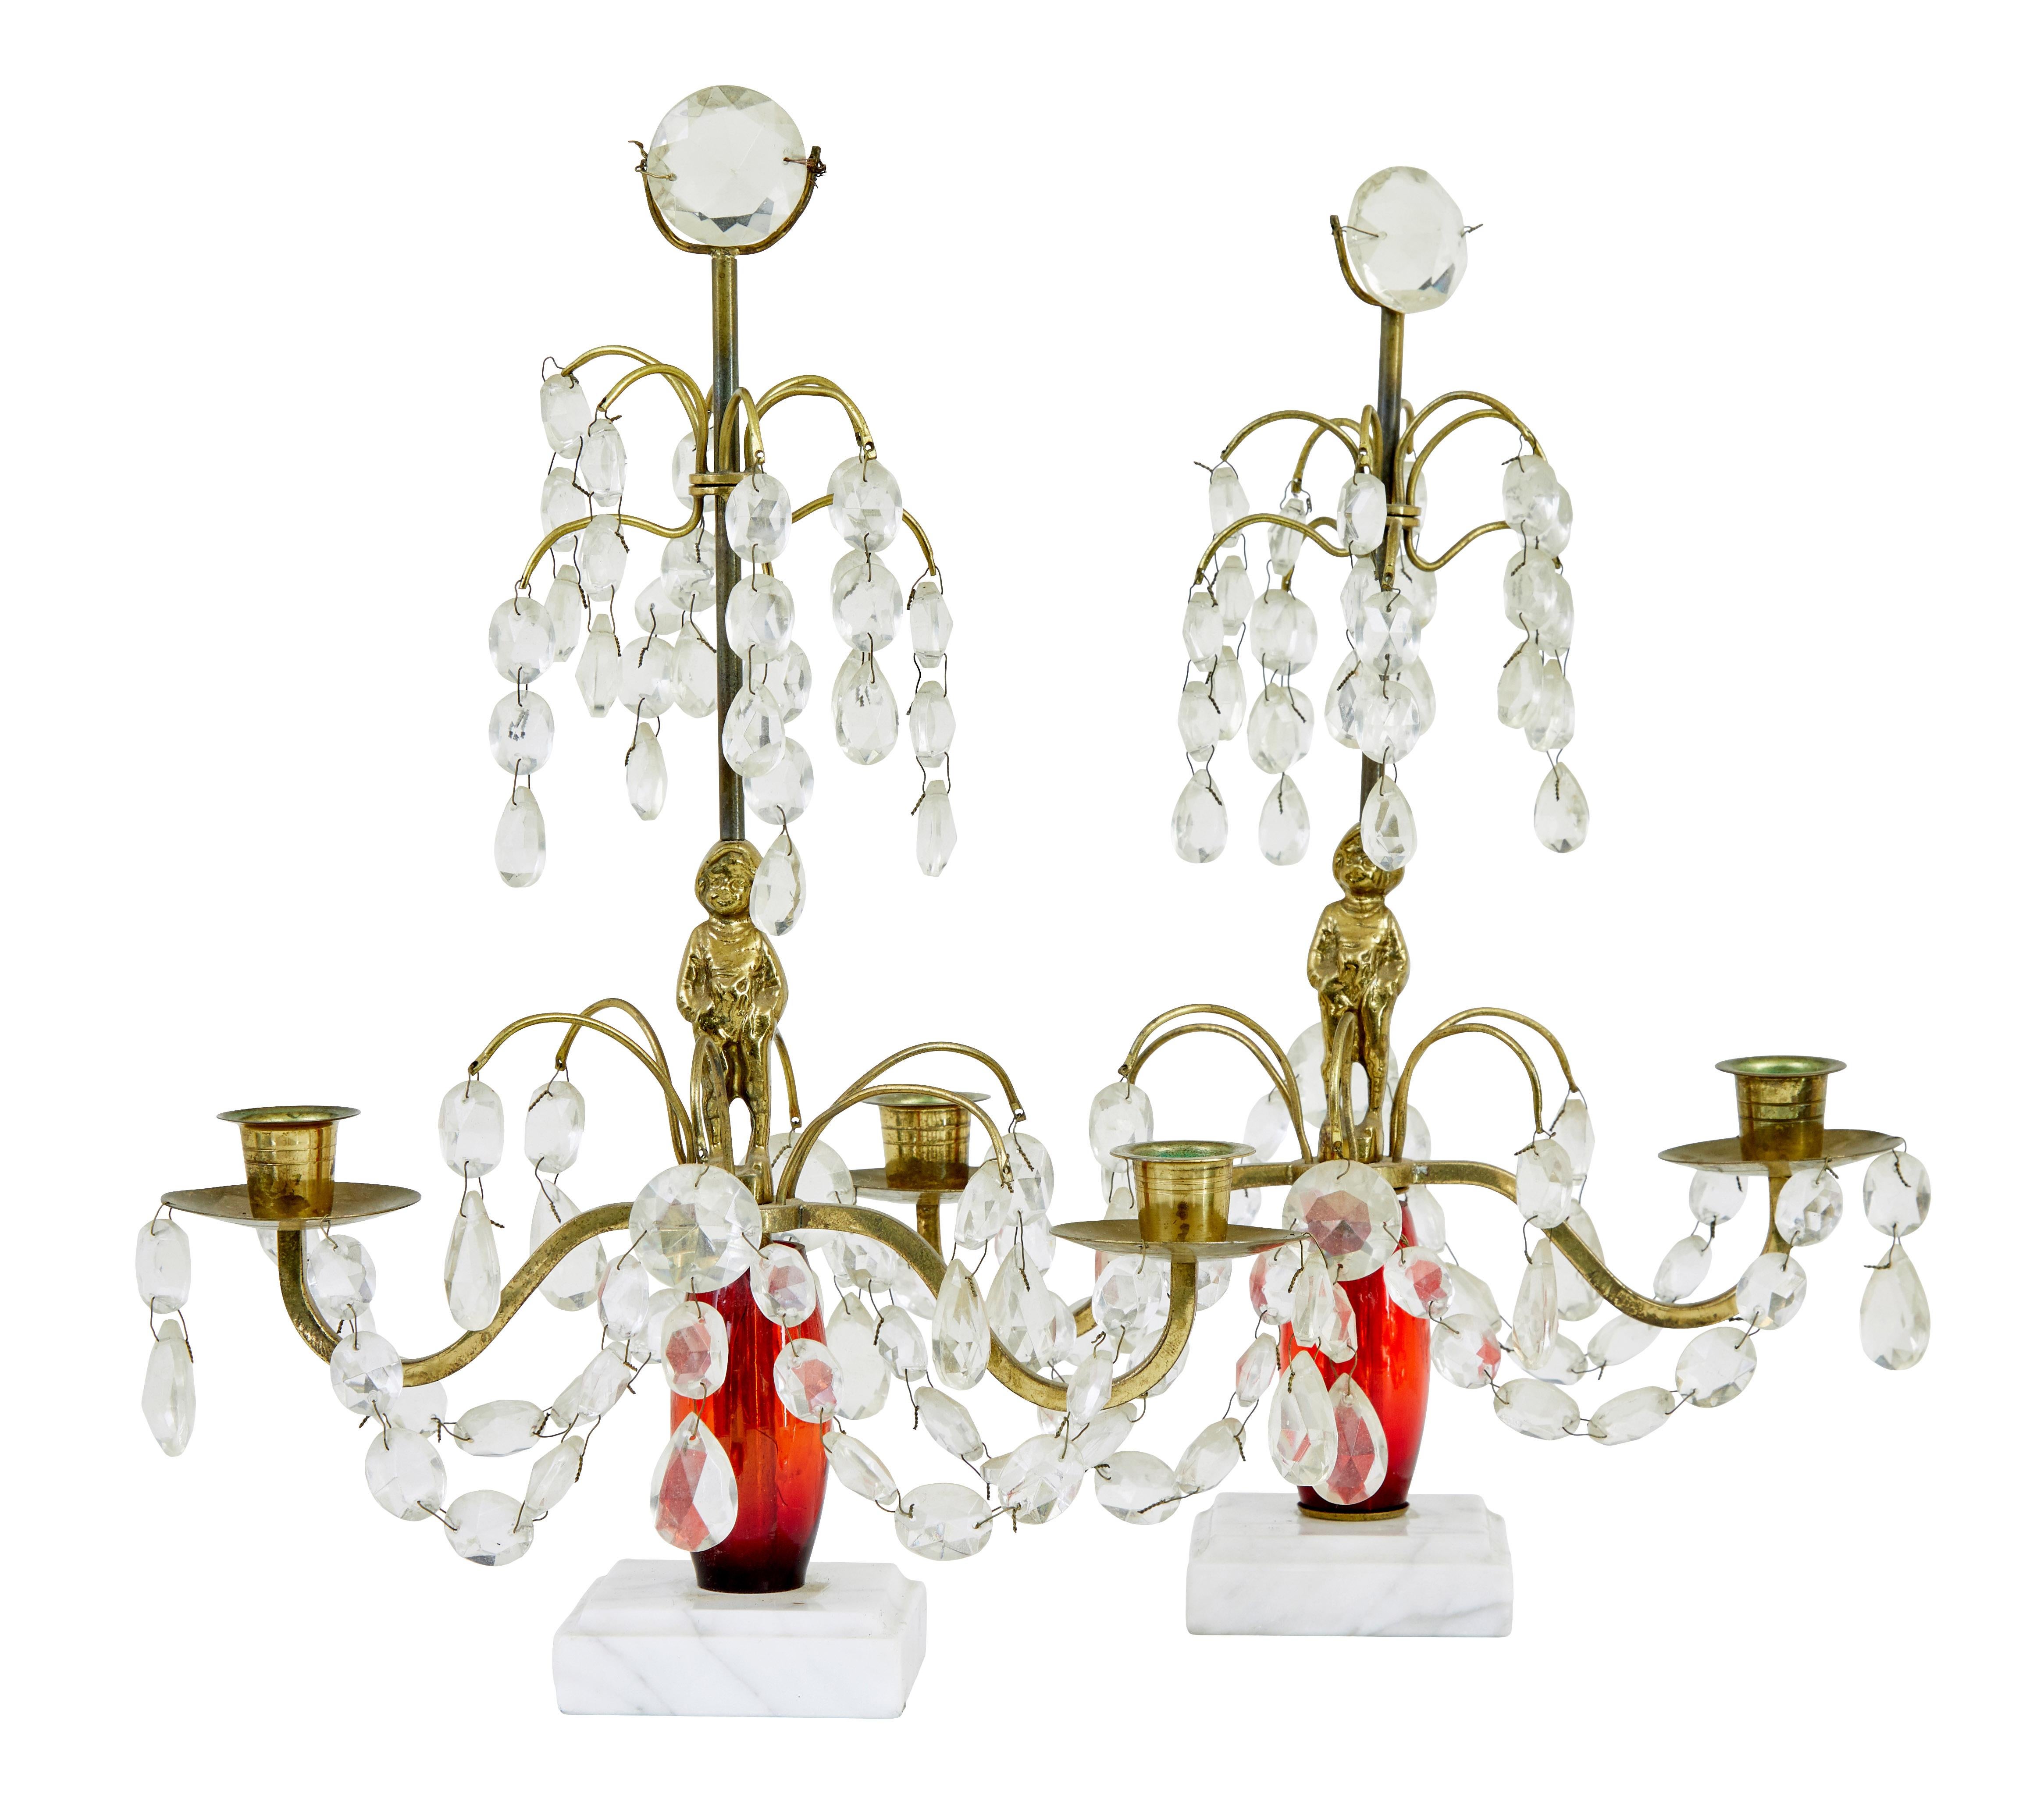 Pair of mid 20th century cut glass and marble candelabra circa 1960.

Main red plastic stem with a brass figure of boy in the centre.  2 brass arms with 2 candle fittings. Cut glass droplets, standing on a white marble base.

Minor dis-colouration